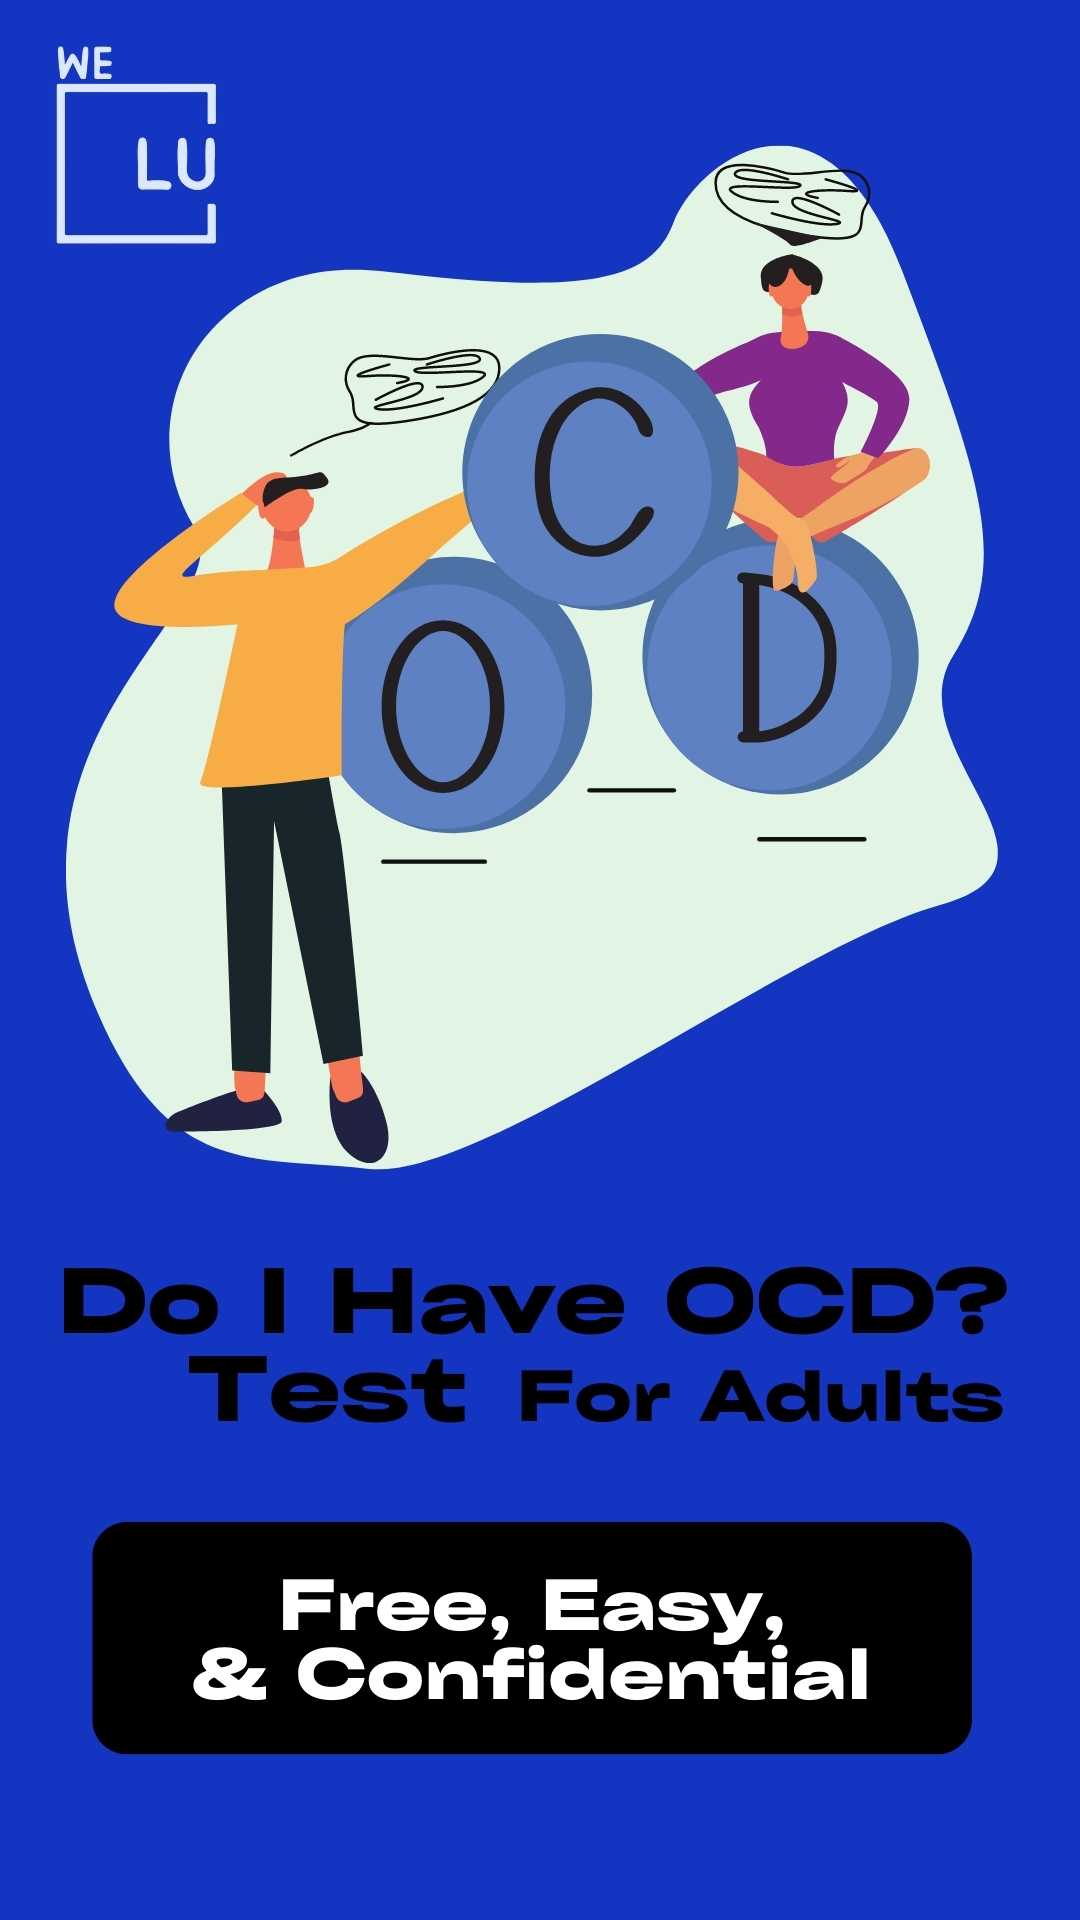 Wondering if you have OCD? Take our Do I Have OCD Test! An OCD quiz can help identify responses that suggest OCD disorder.